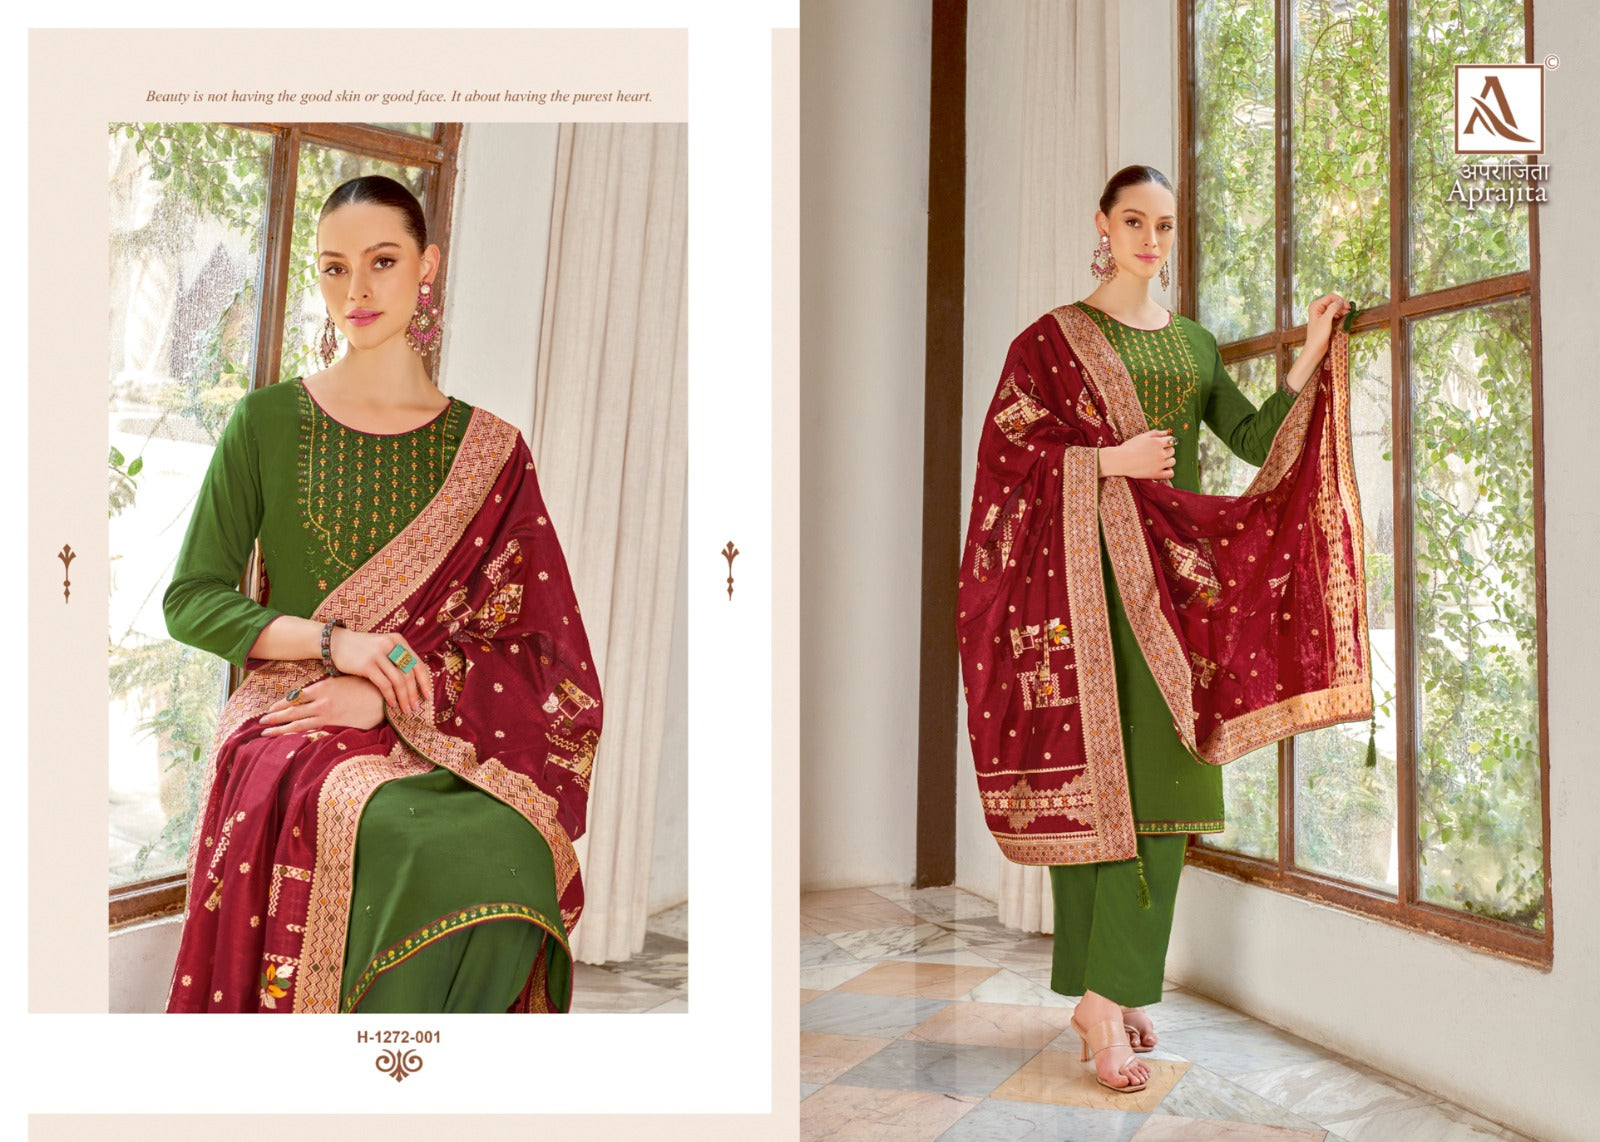 Alok Suits Aprajita jam cotton with embroidery work suits latest collection - jilaniwholesalesuit